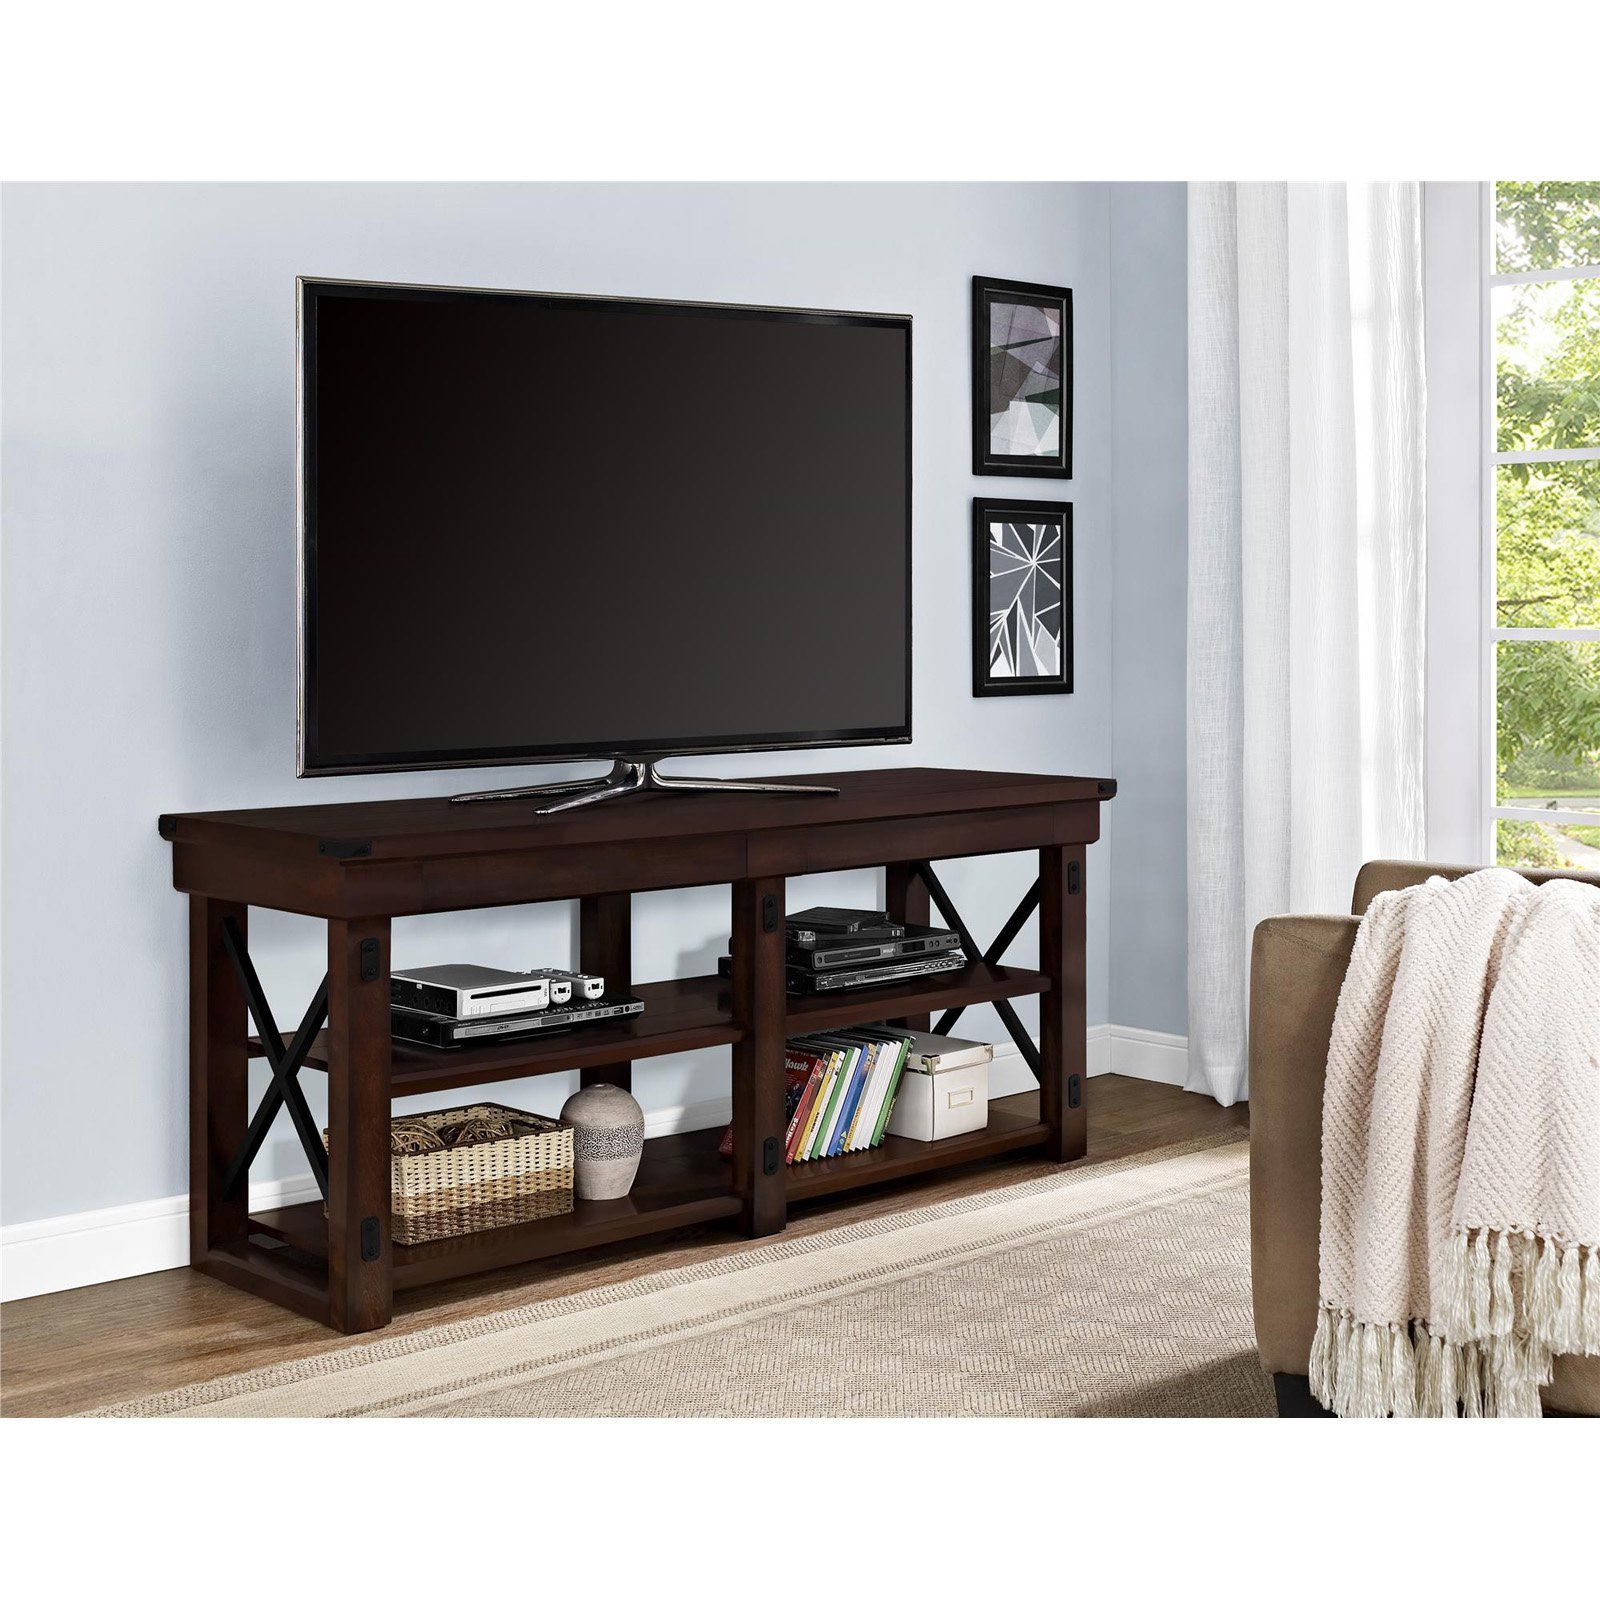 Ameriwood Home Wildwood Tv Stand For Tvs Up To 65 Throughout Totally Tv Stands For Tvs Up To 65" (View 10 of 15)